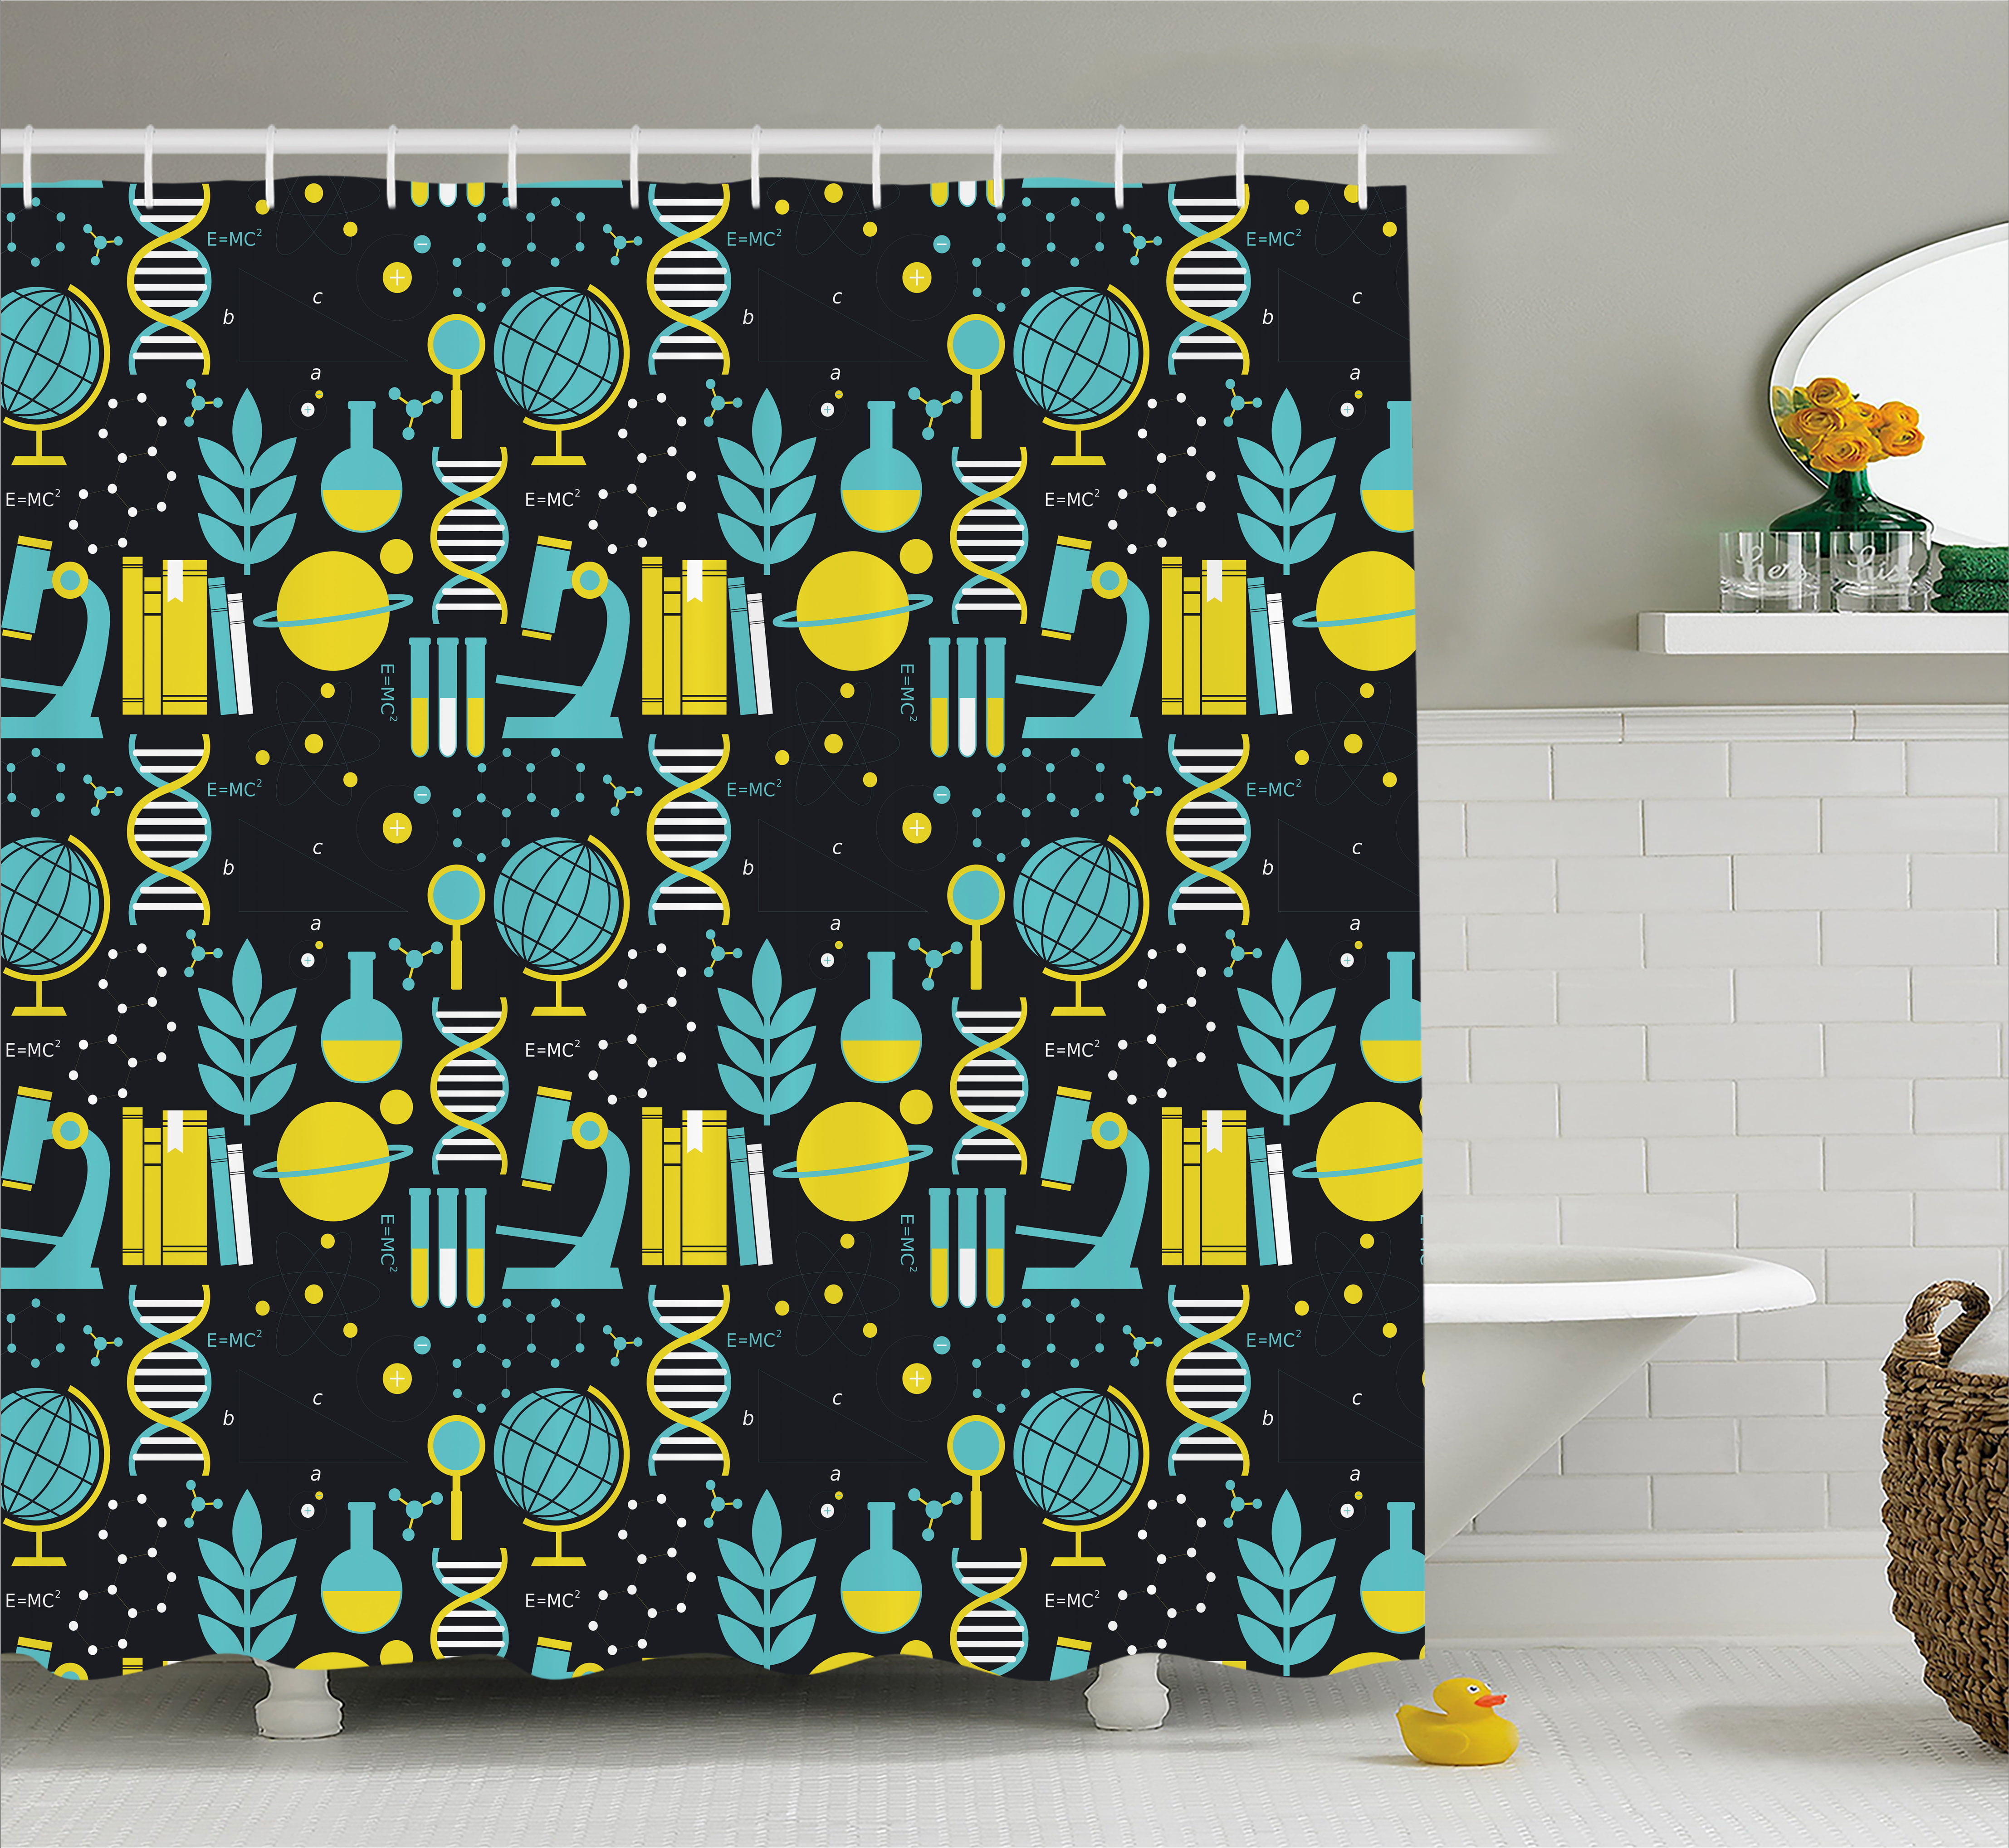 Science shower curtain